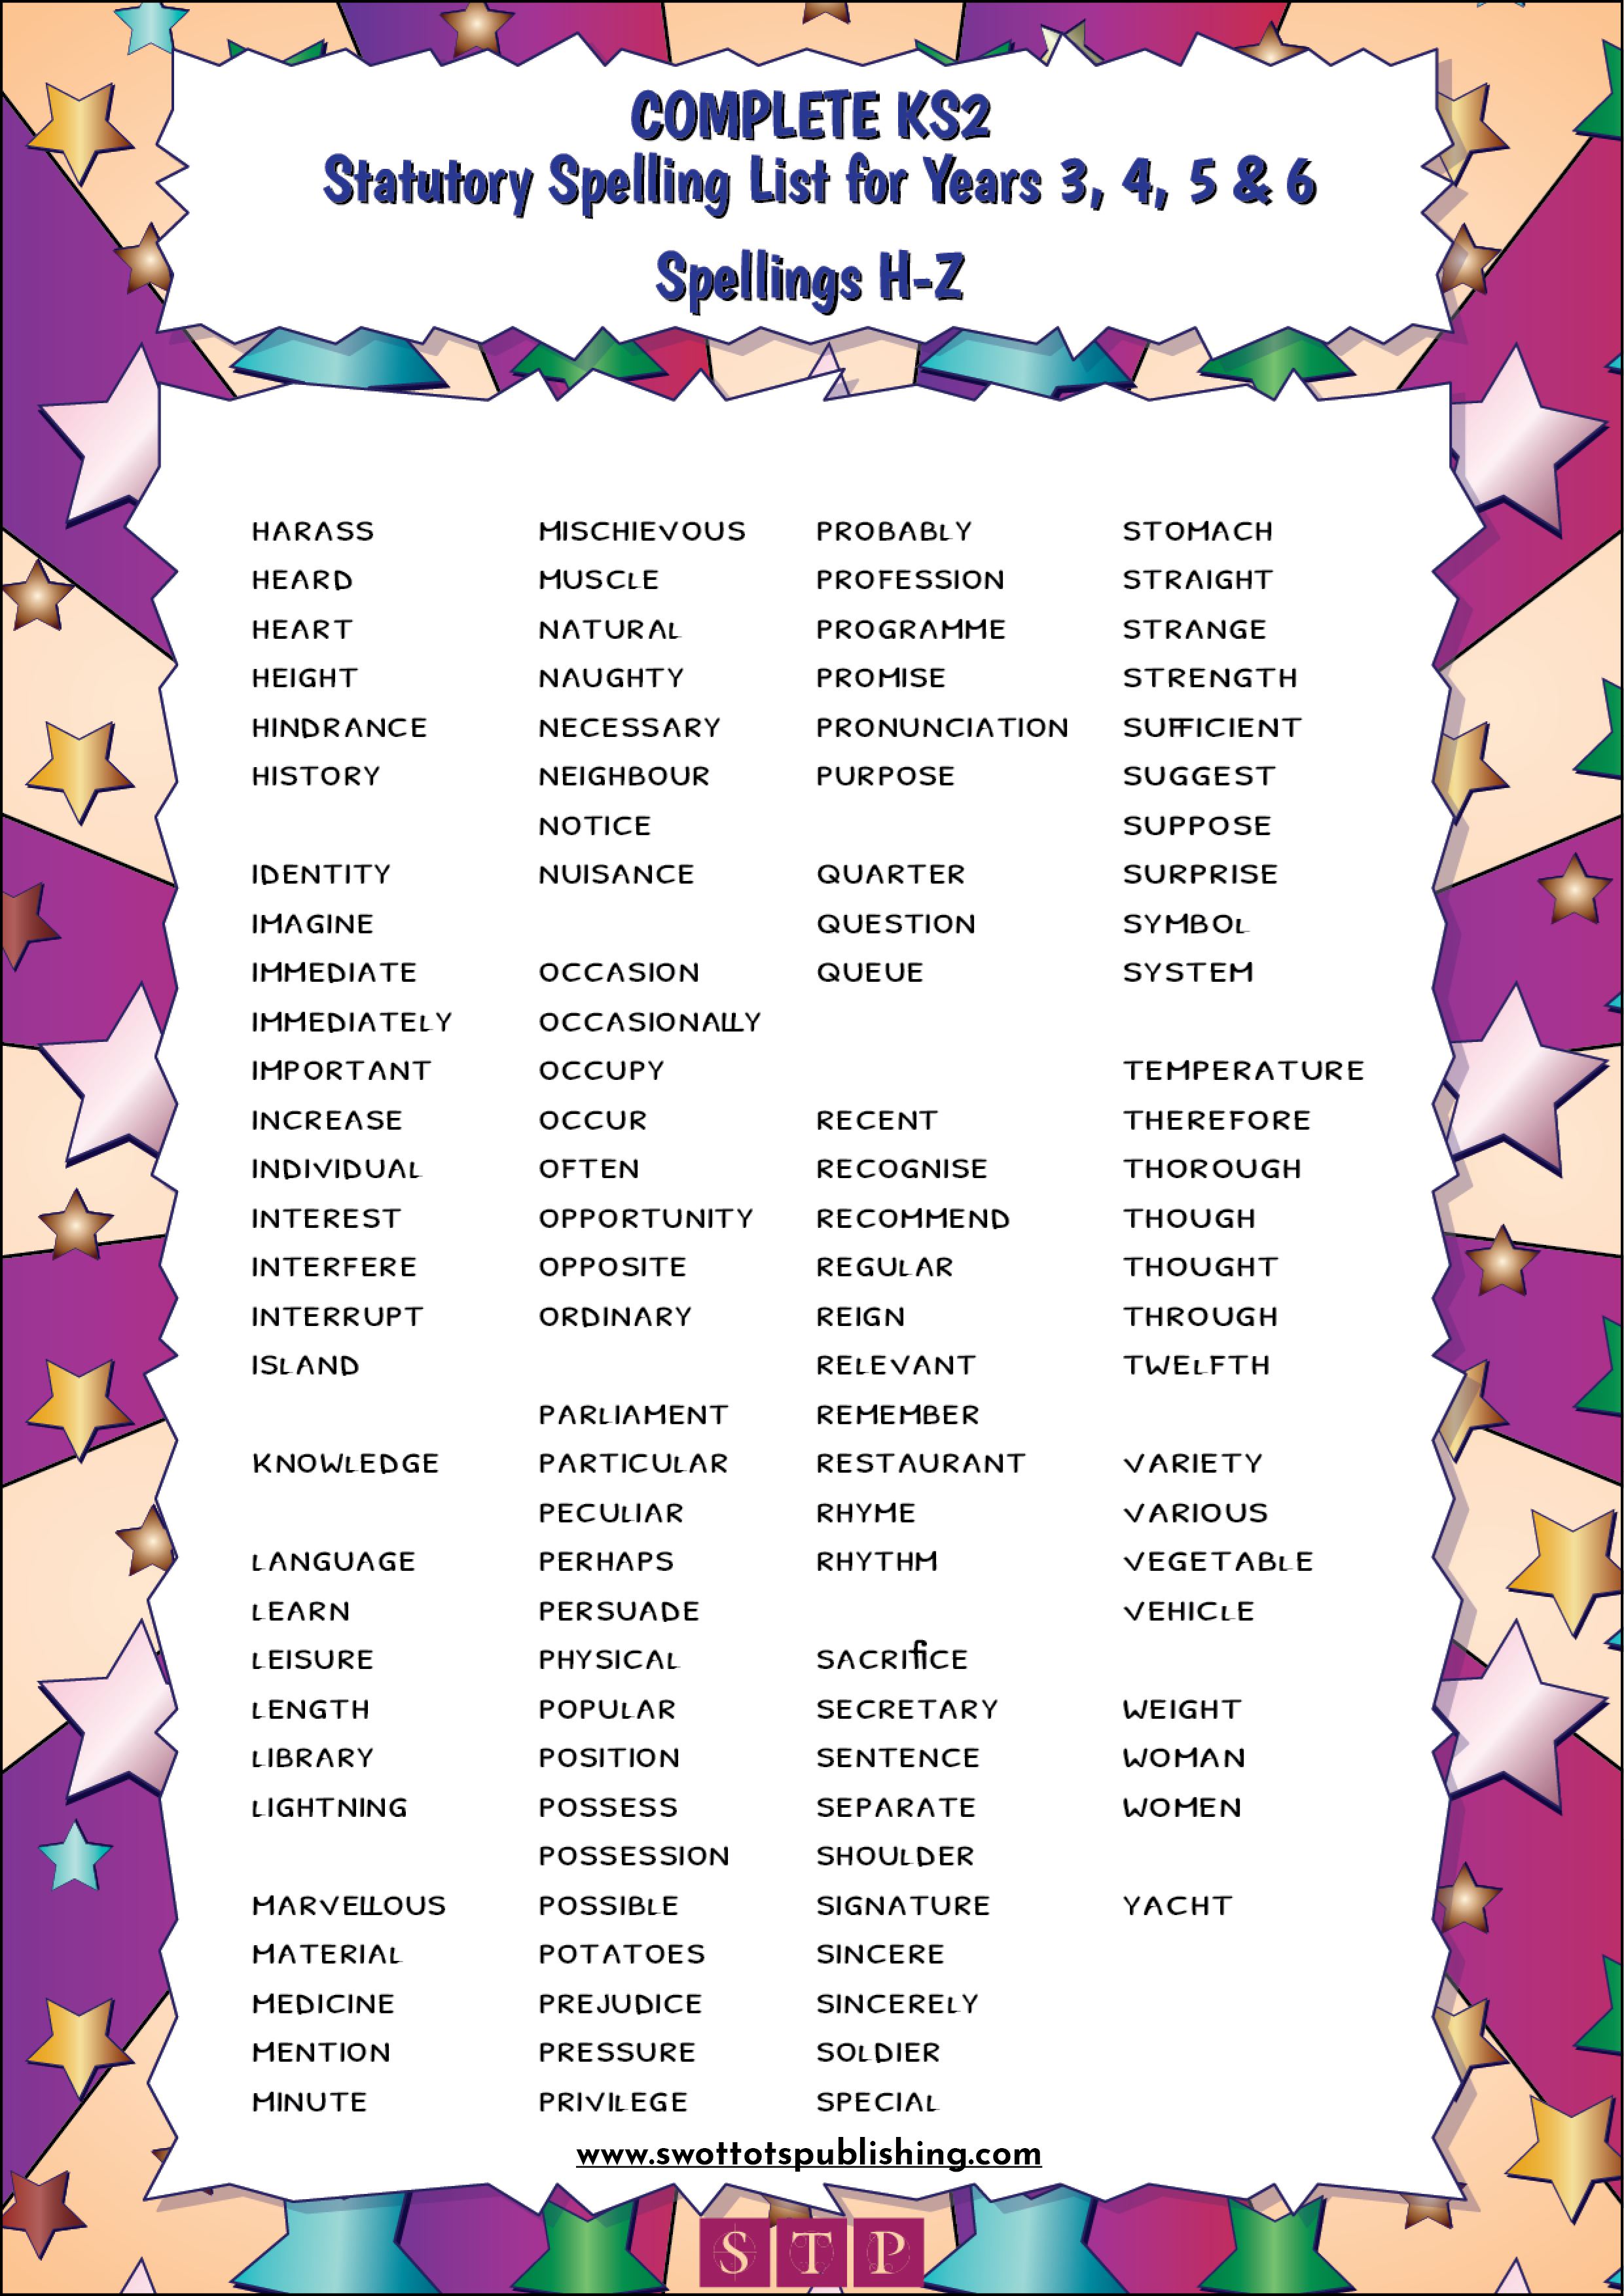 list-of-spelling-words-hot-sex-picture